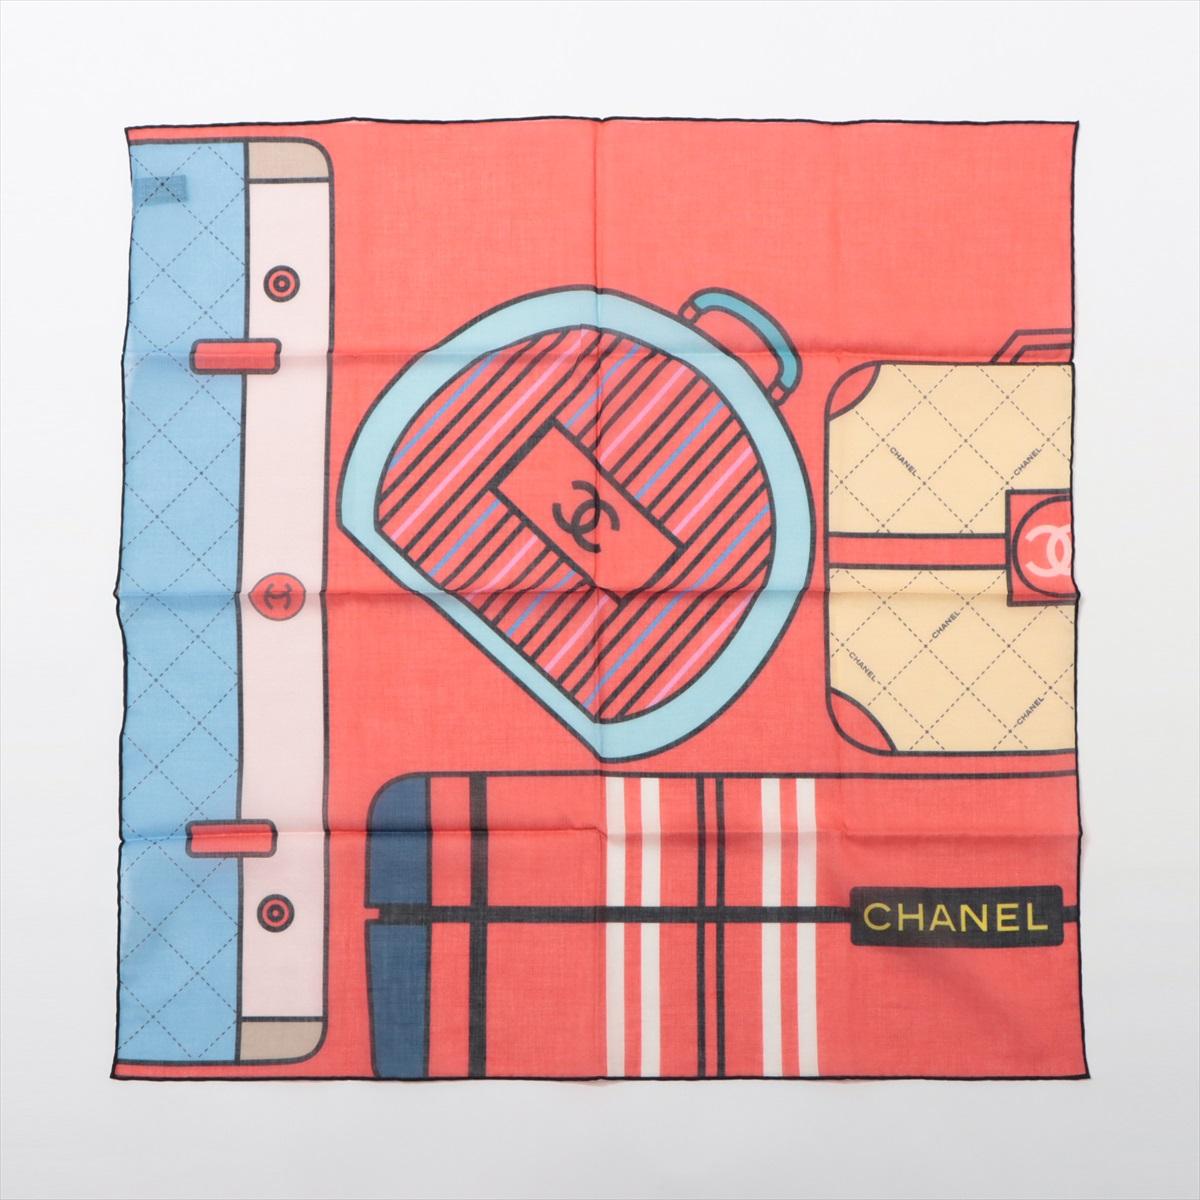 The Chanel Printed Cotton Multicolor Scarf is a vibrant and chic accessory that embodies the essence of Chanel's iconic style. Crafted from soft and lightweight cotton, the scarf features an eye-catching print showcasing Chanel's signature bags and